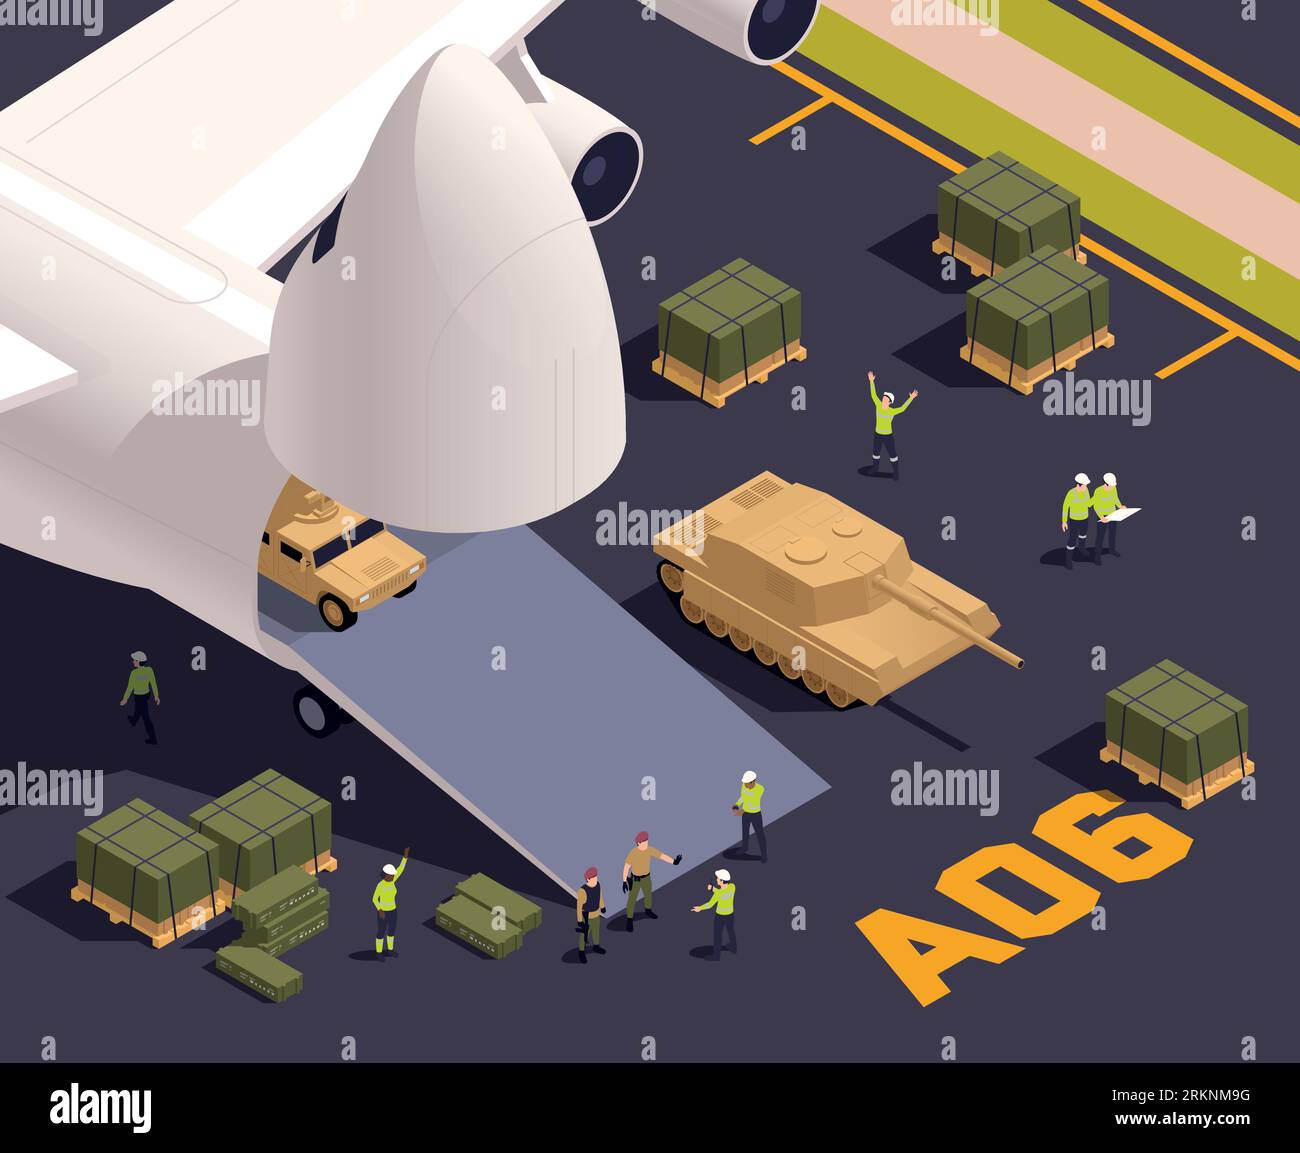 Air cargo isometric concept with military machines loading into aircraft vector illustration Stock Vector